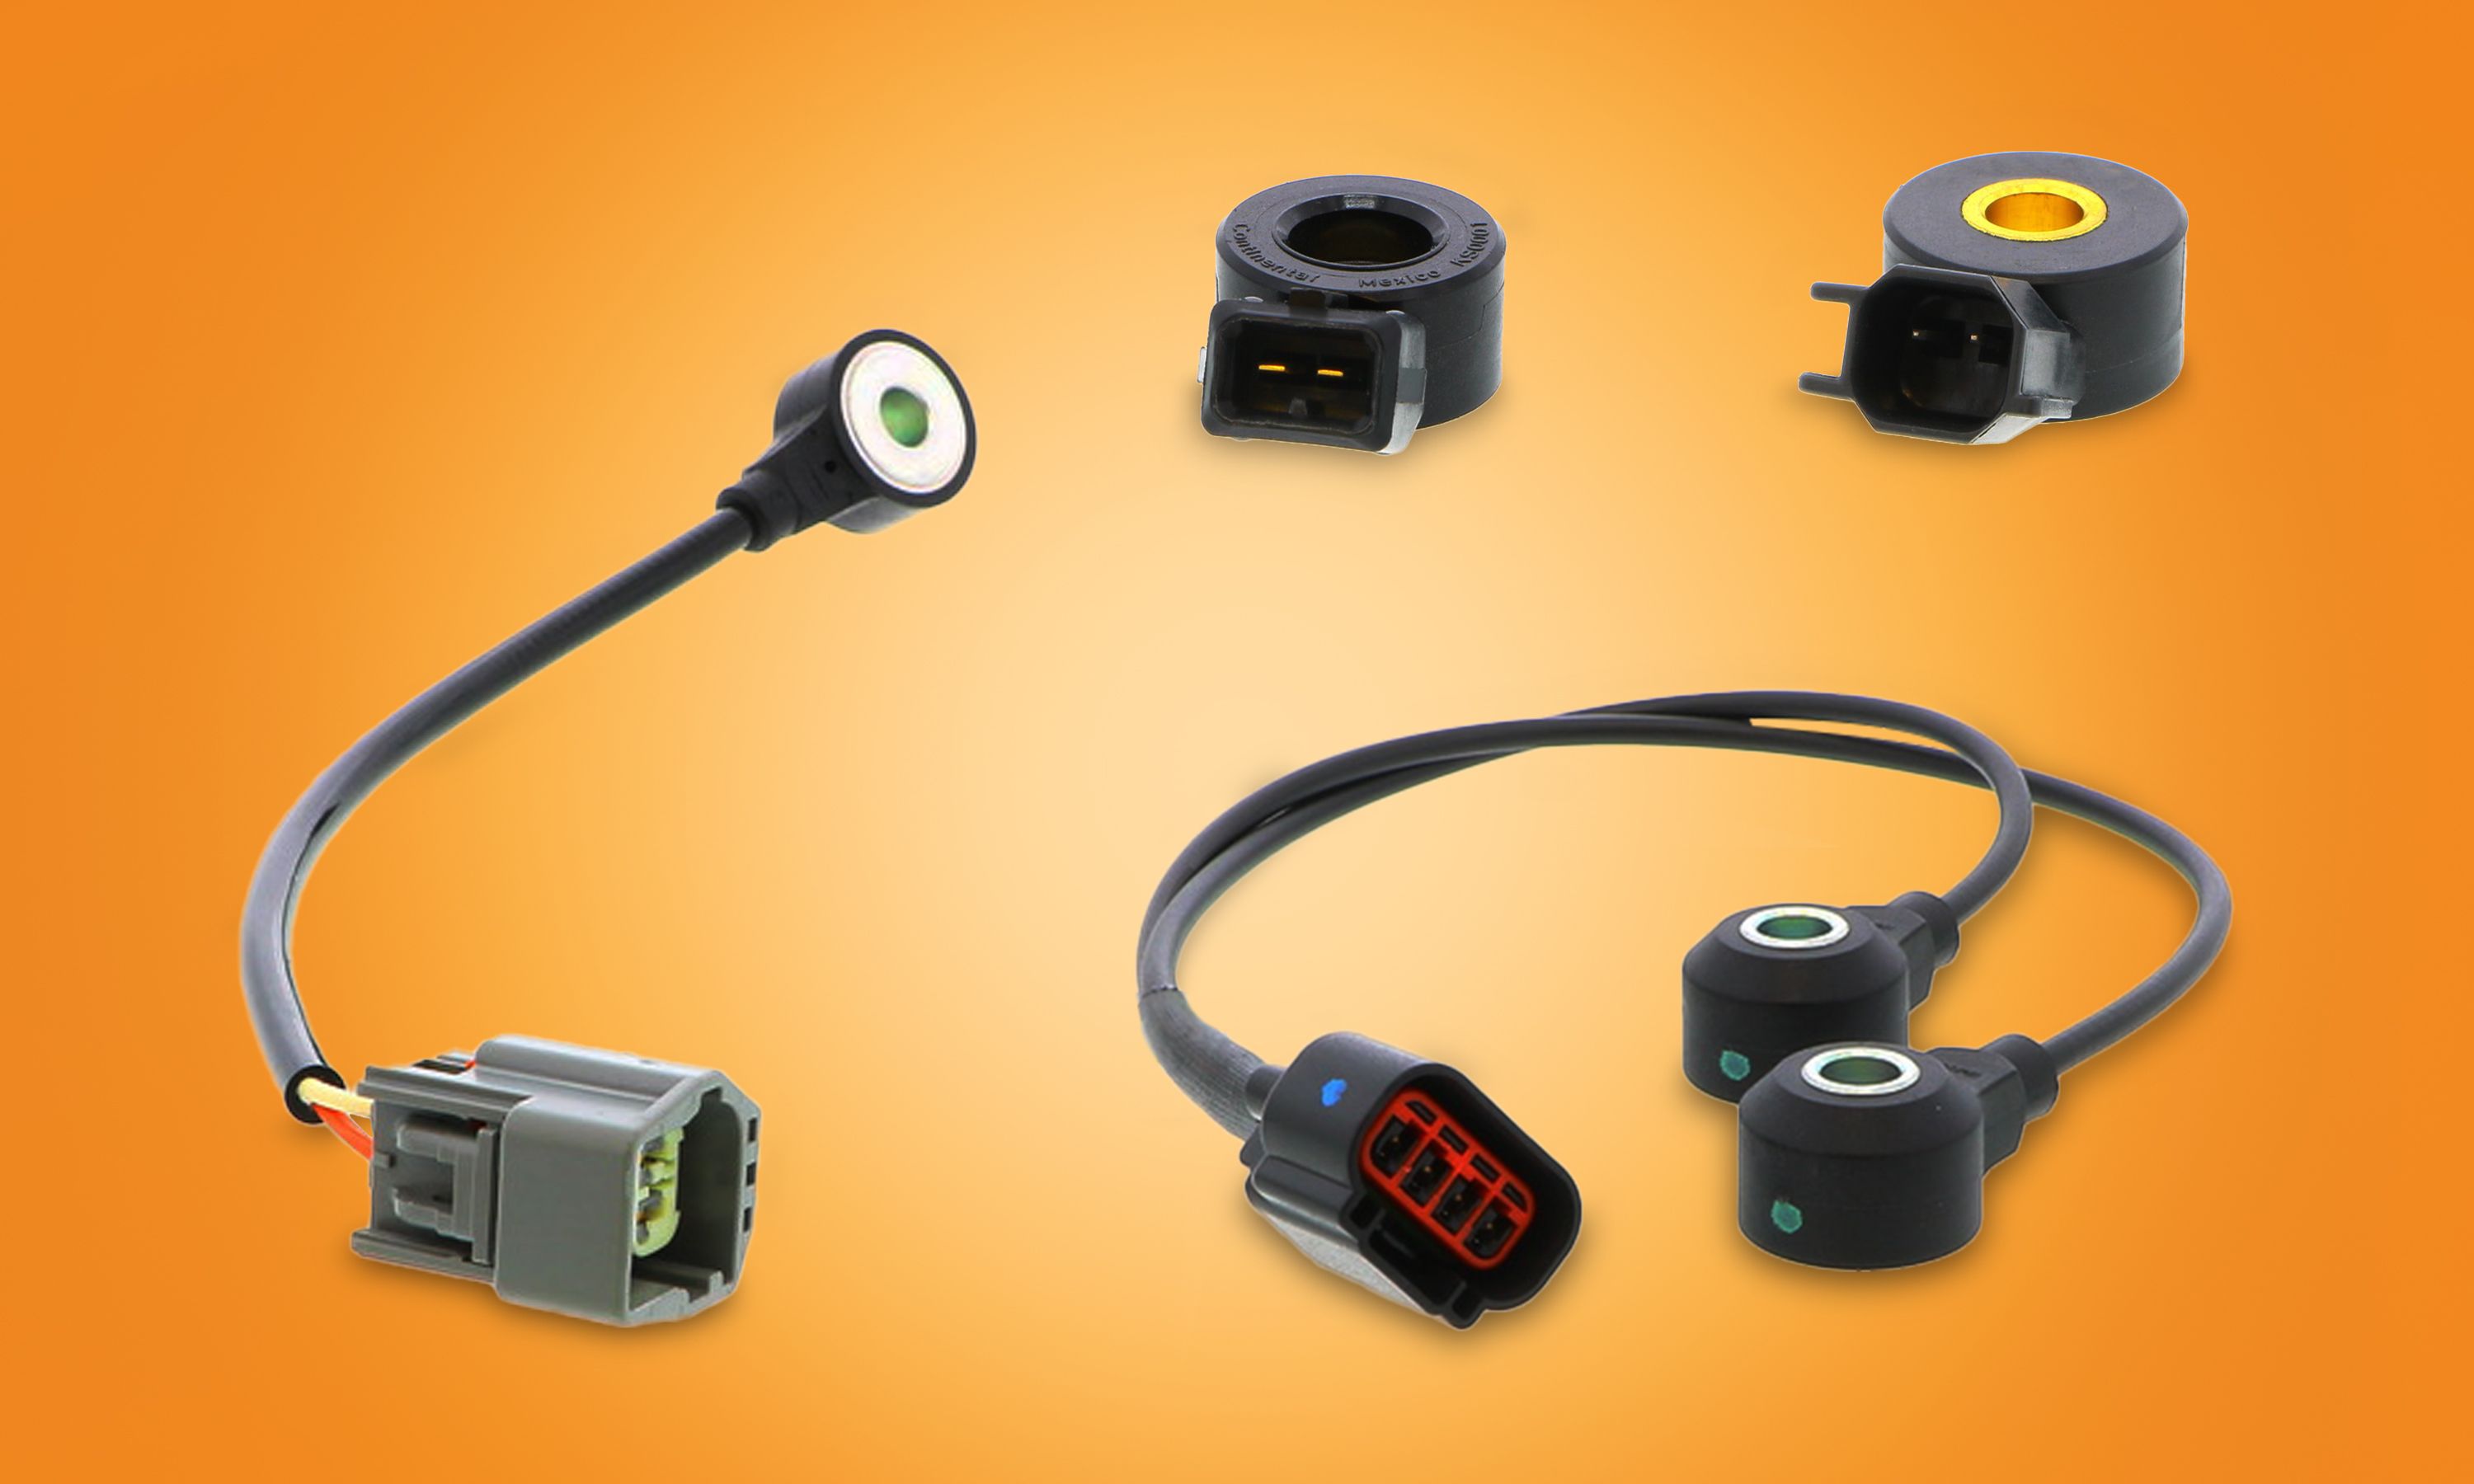 Continental has added eight new part numbers to their original equipment manufacturer (OEM) Knock Sensors line. 